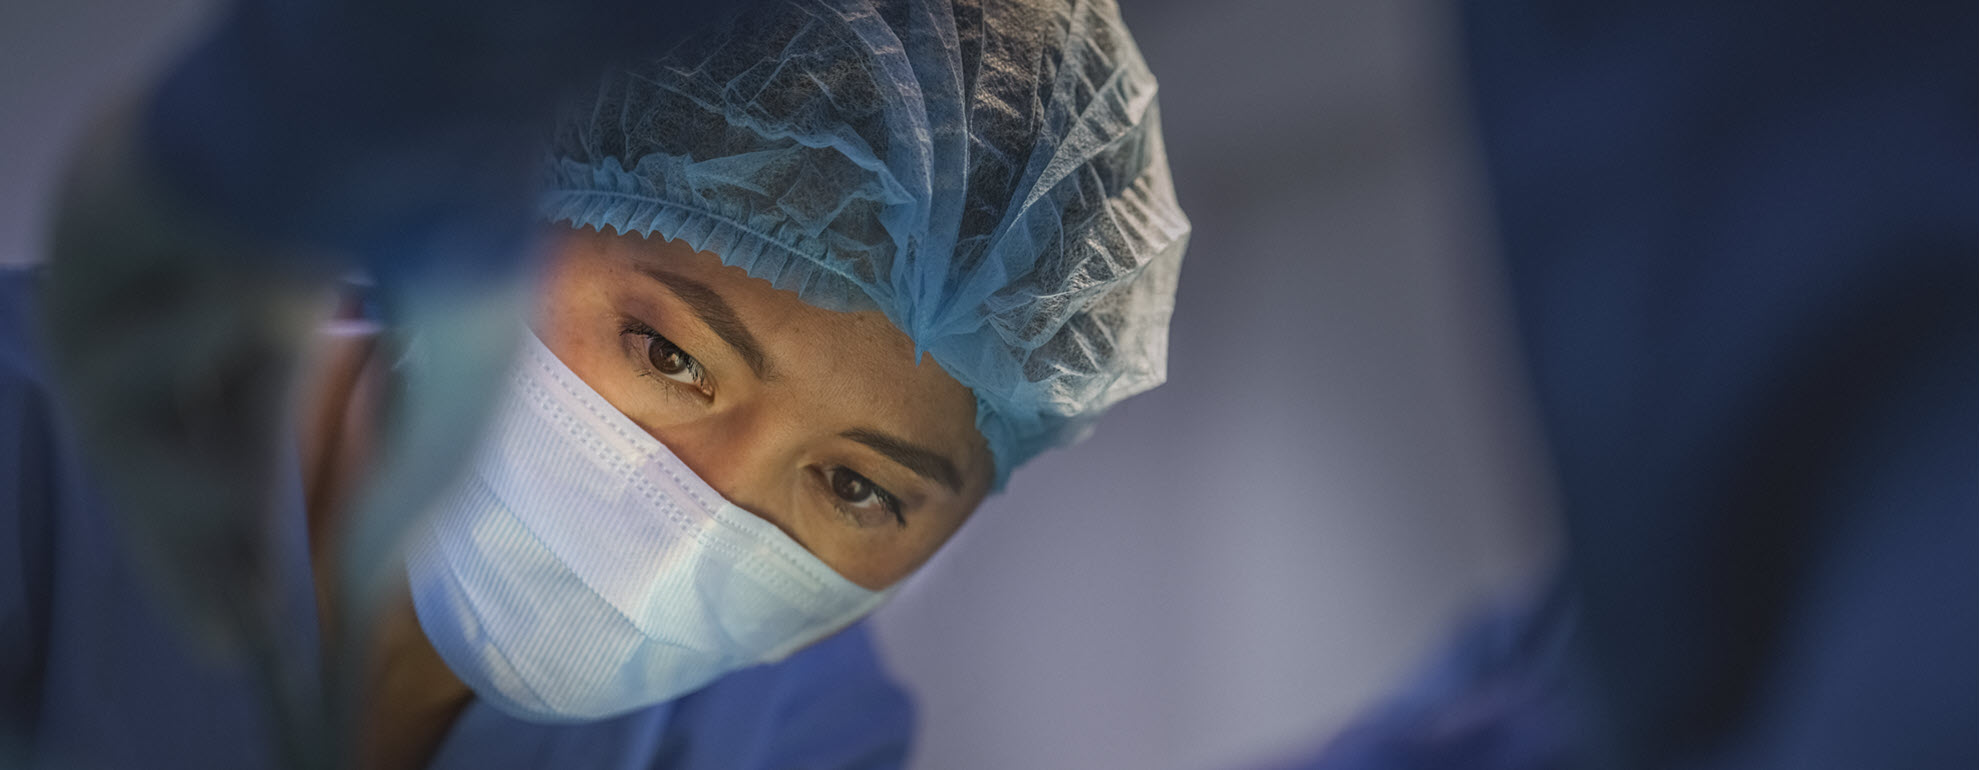 Surgeon  in operating room